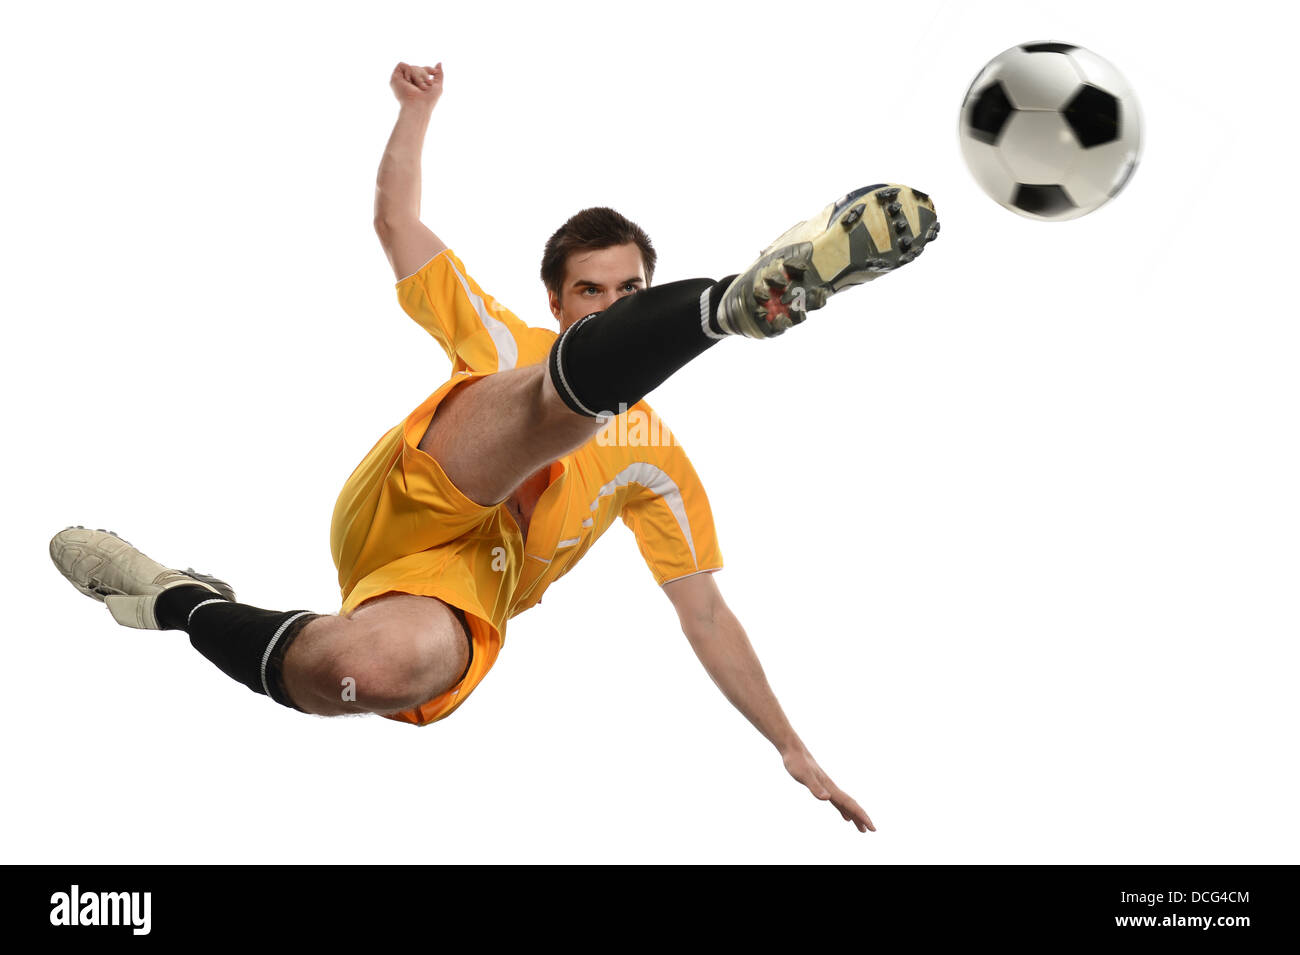 Soccer player kicking ball lors d'un saut isolated over white background Banque D'Images